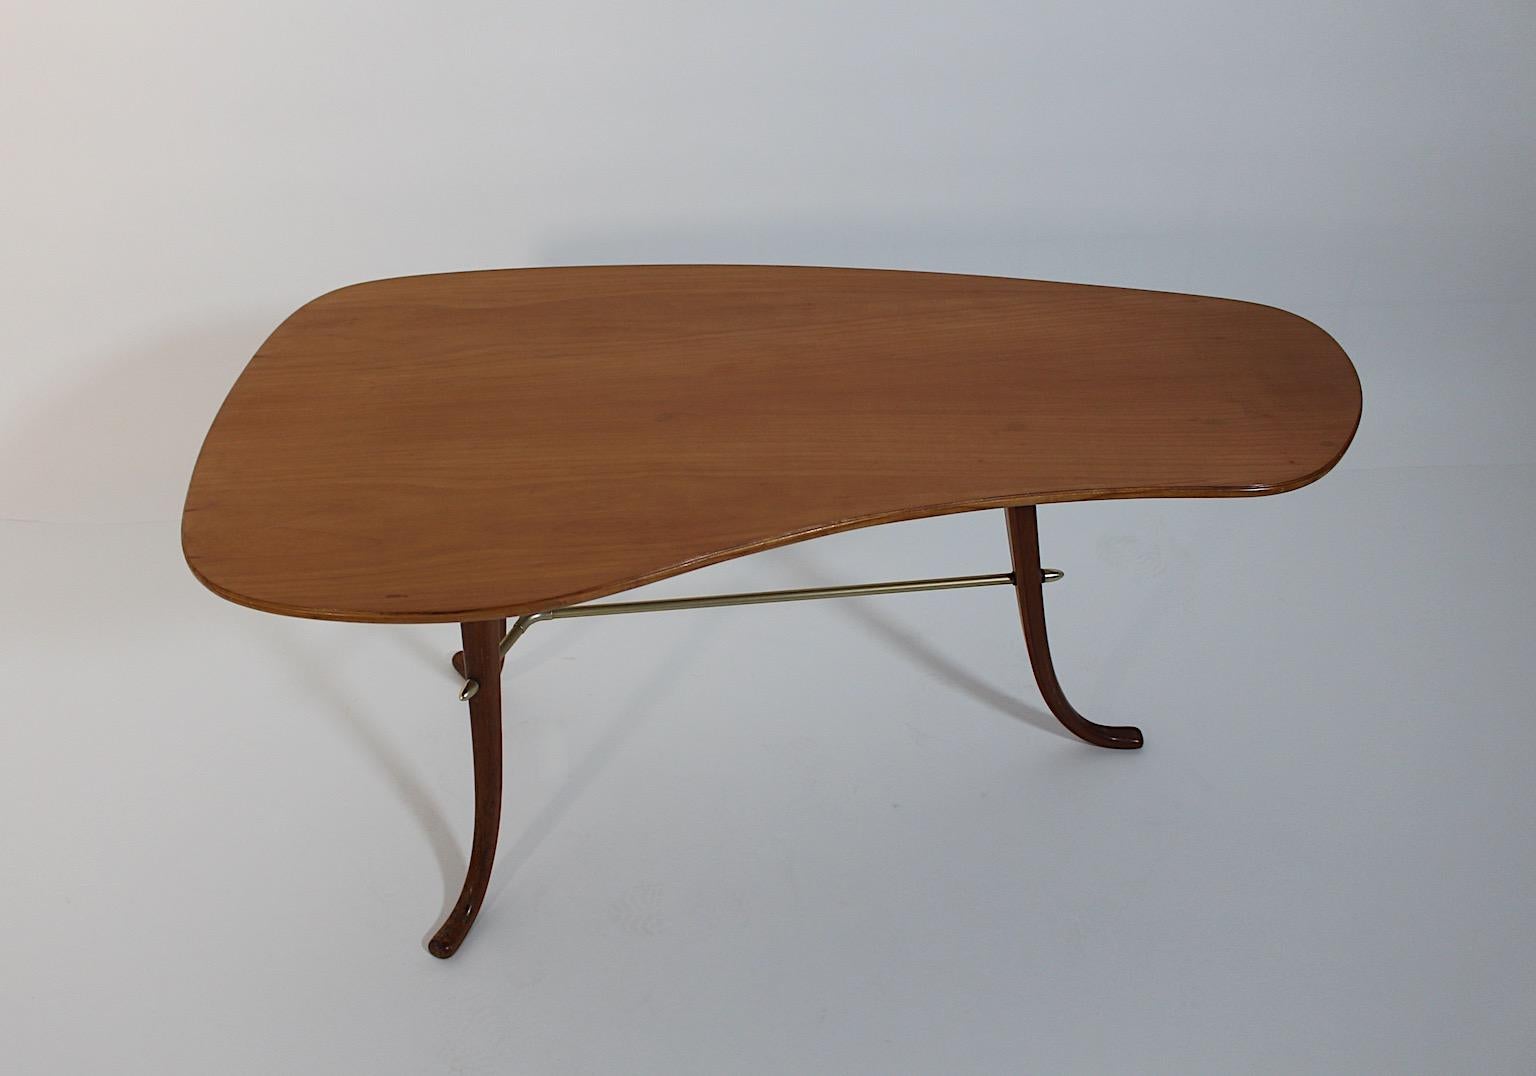 20th Century Modernist Cherry Brass Side Table Coffee Table Josef Frank, 1950s, Sweden For Sale